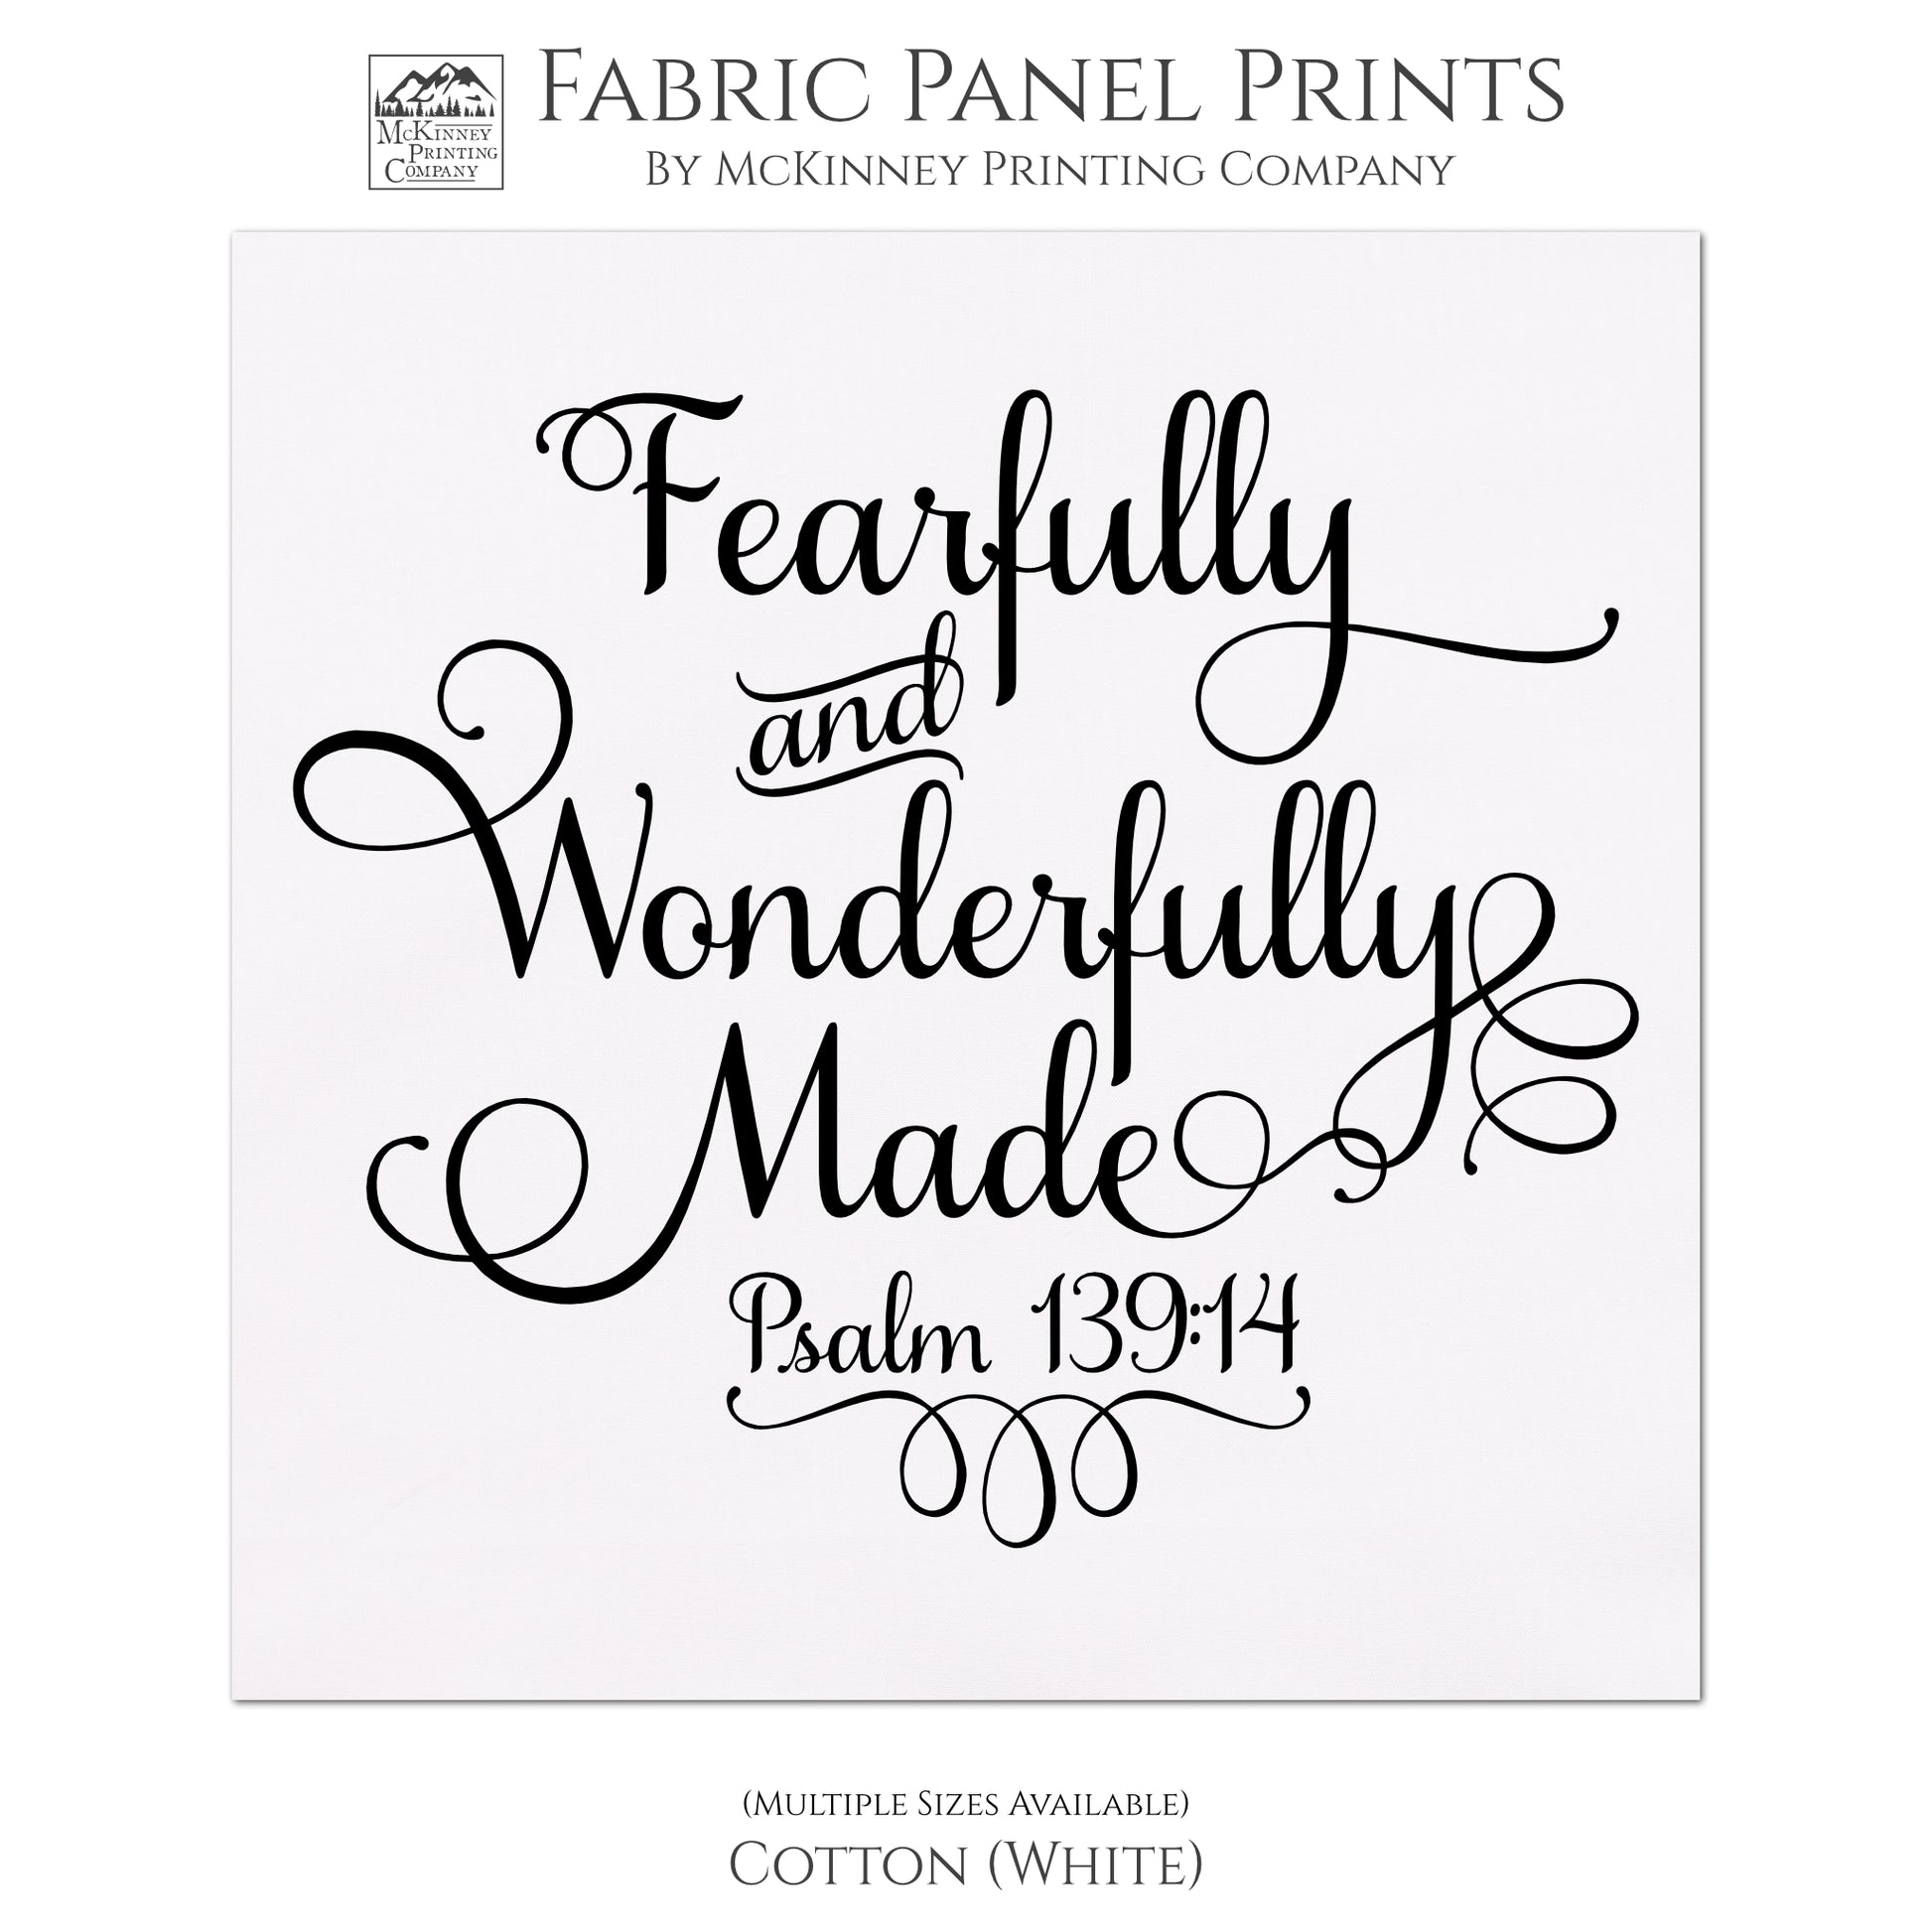 I am fearfully and wonderfully made - Psalm 139:14, Fabric Panel Print, Quilt Block, Scripture Fabric, Girl - Cotton, White